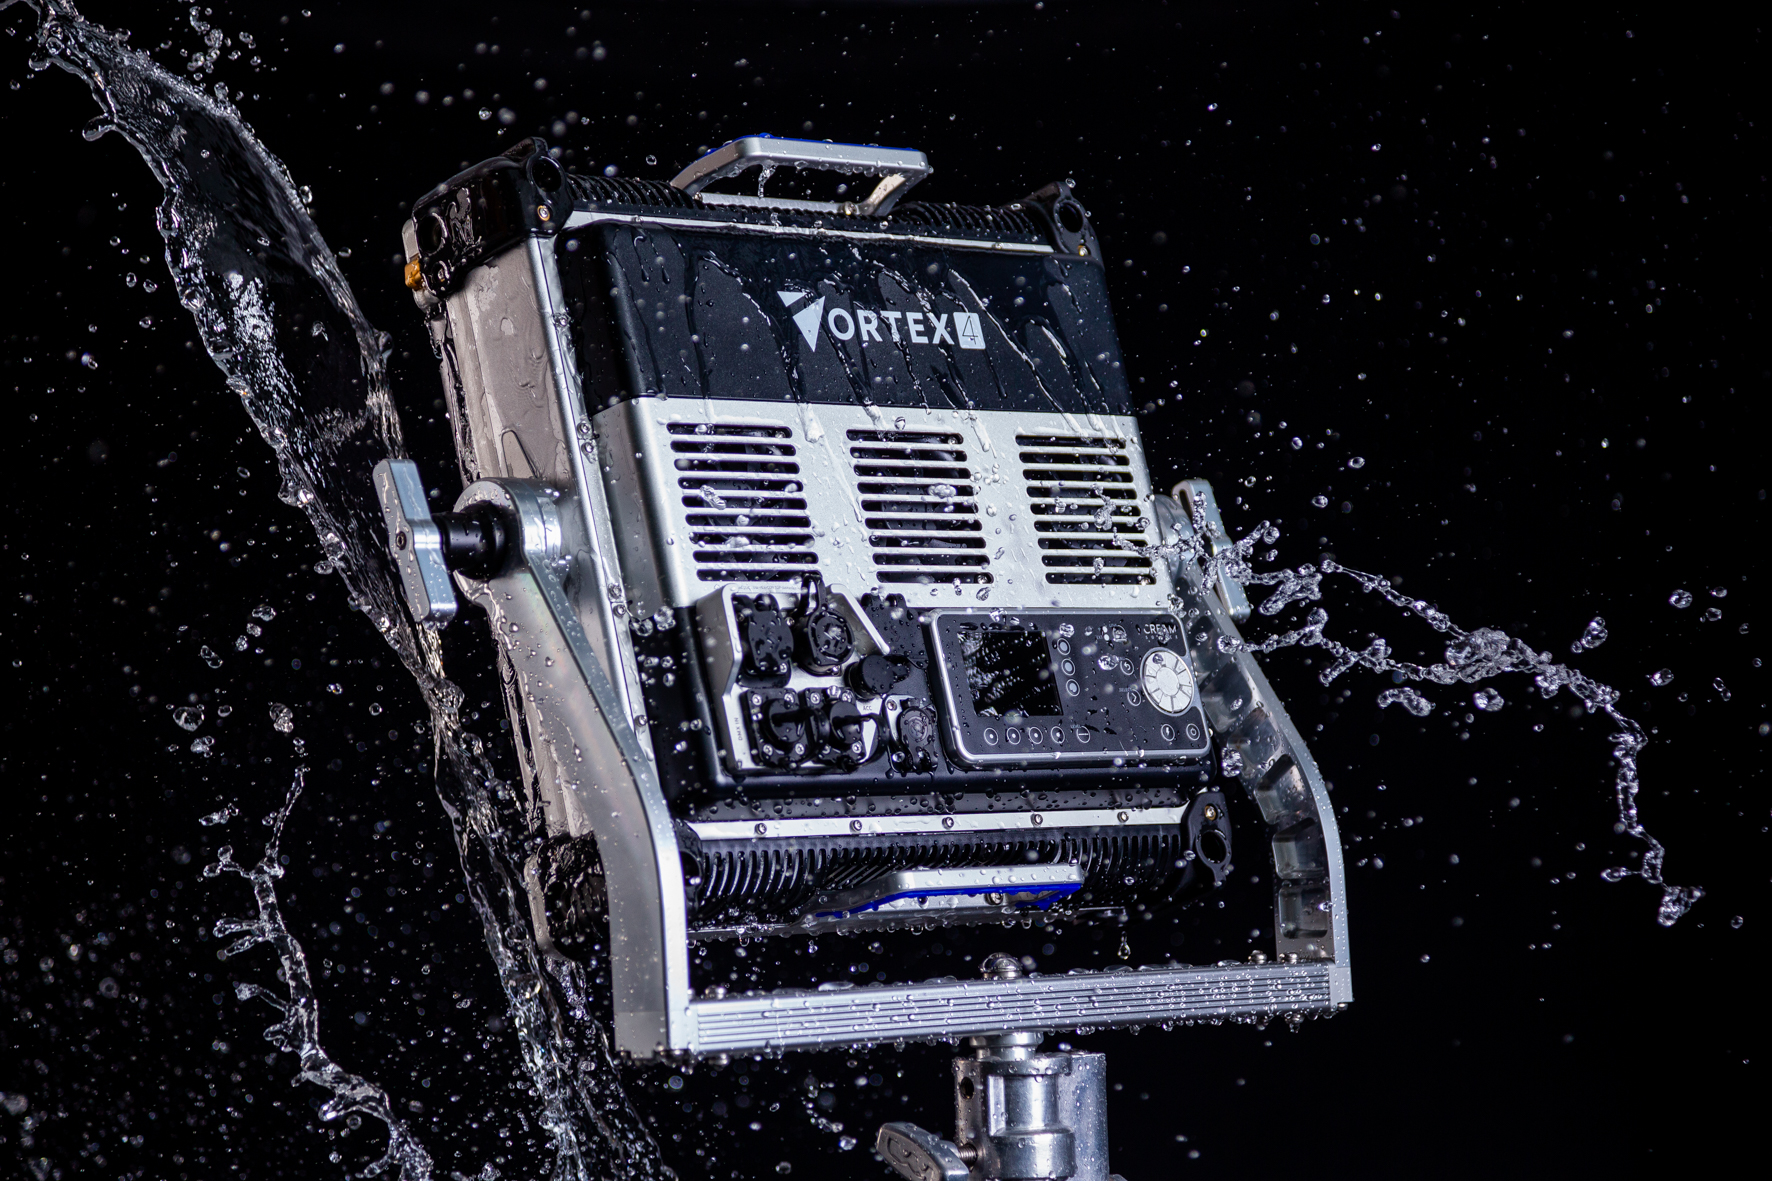 Vortex4 is an IP65-rated water-resistant fixture that can take on weather, messy effects machines, and extreme dust.